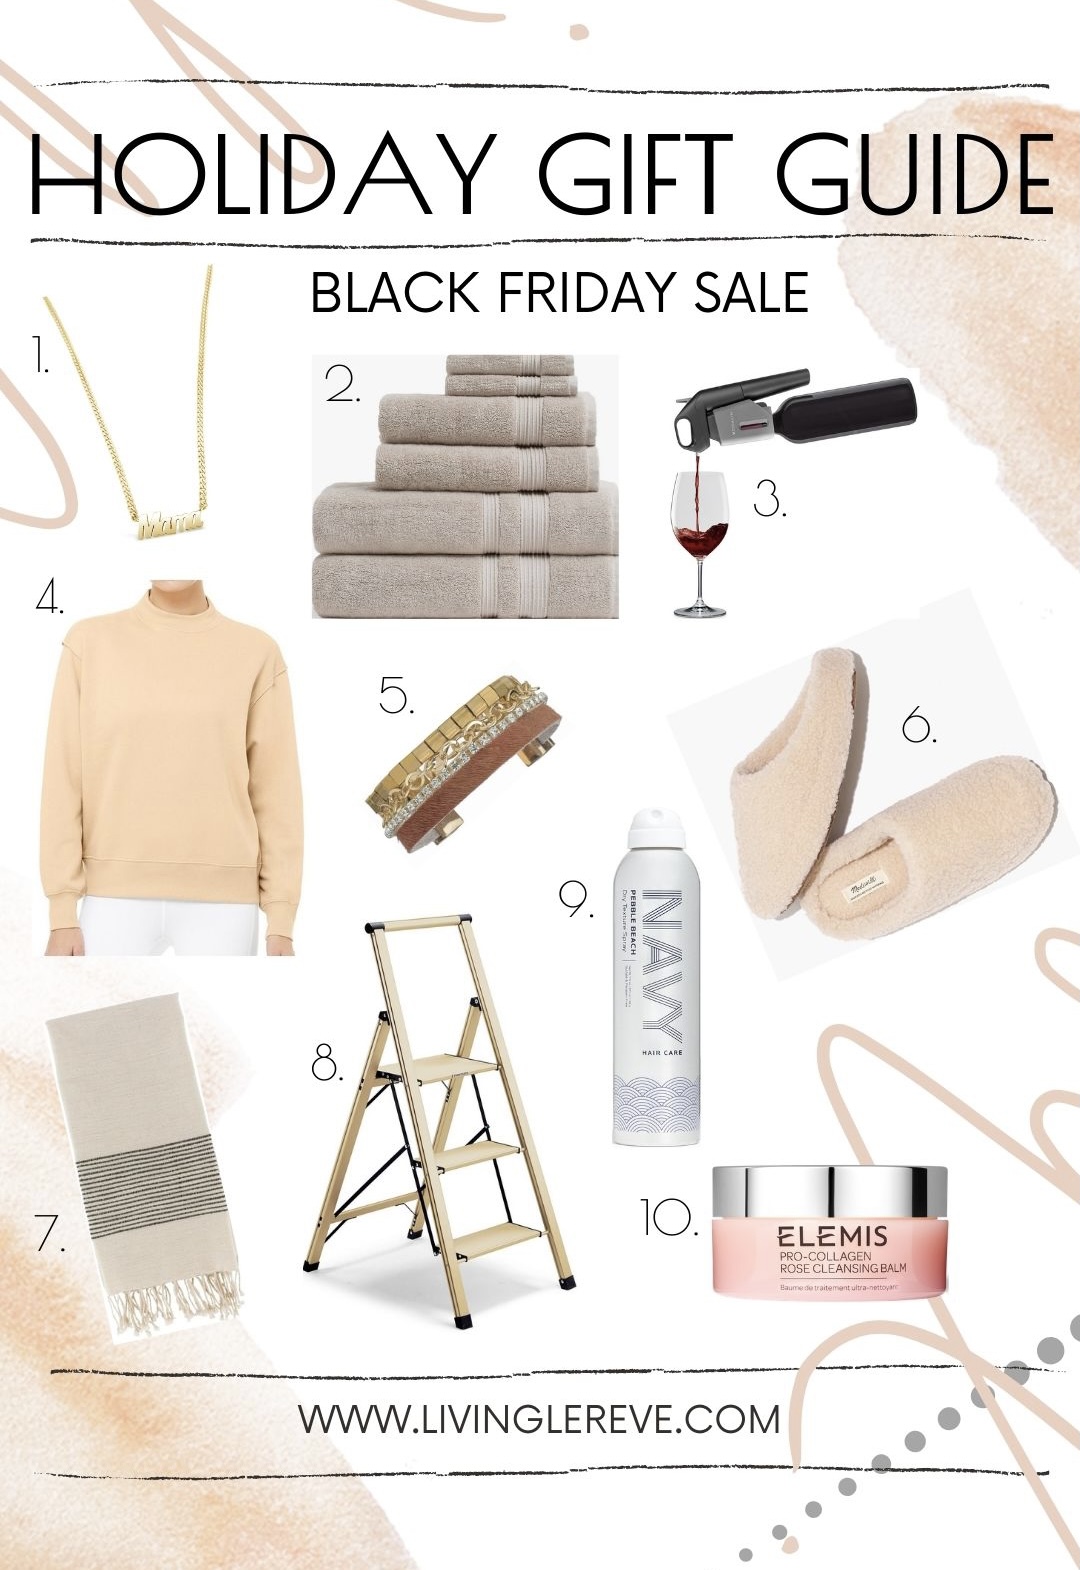 Black Friday holiday gift guide